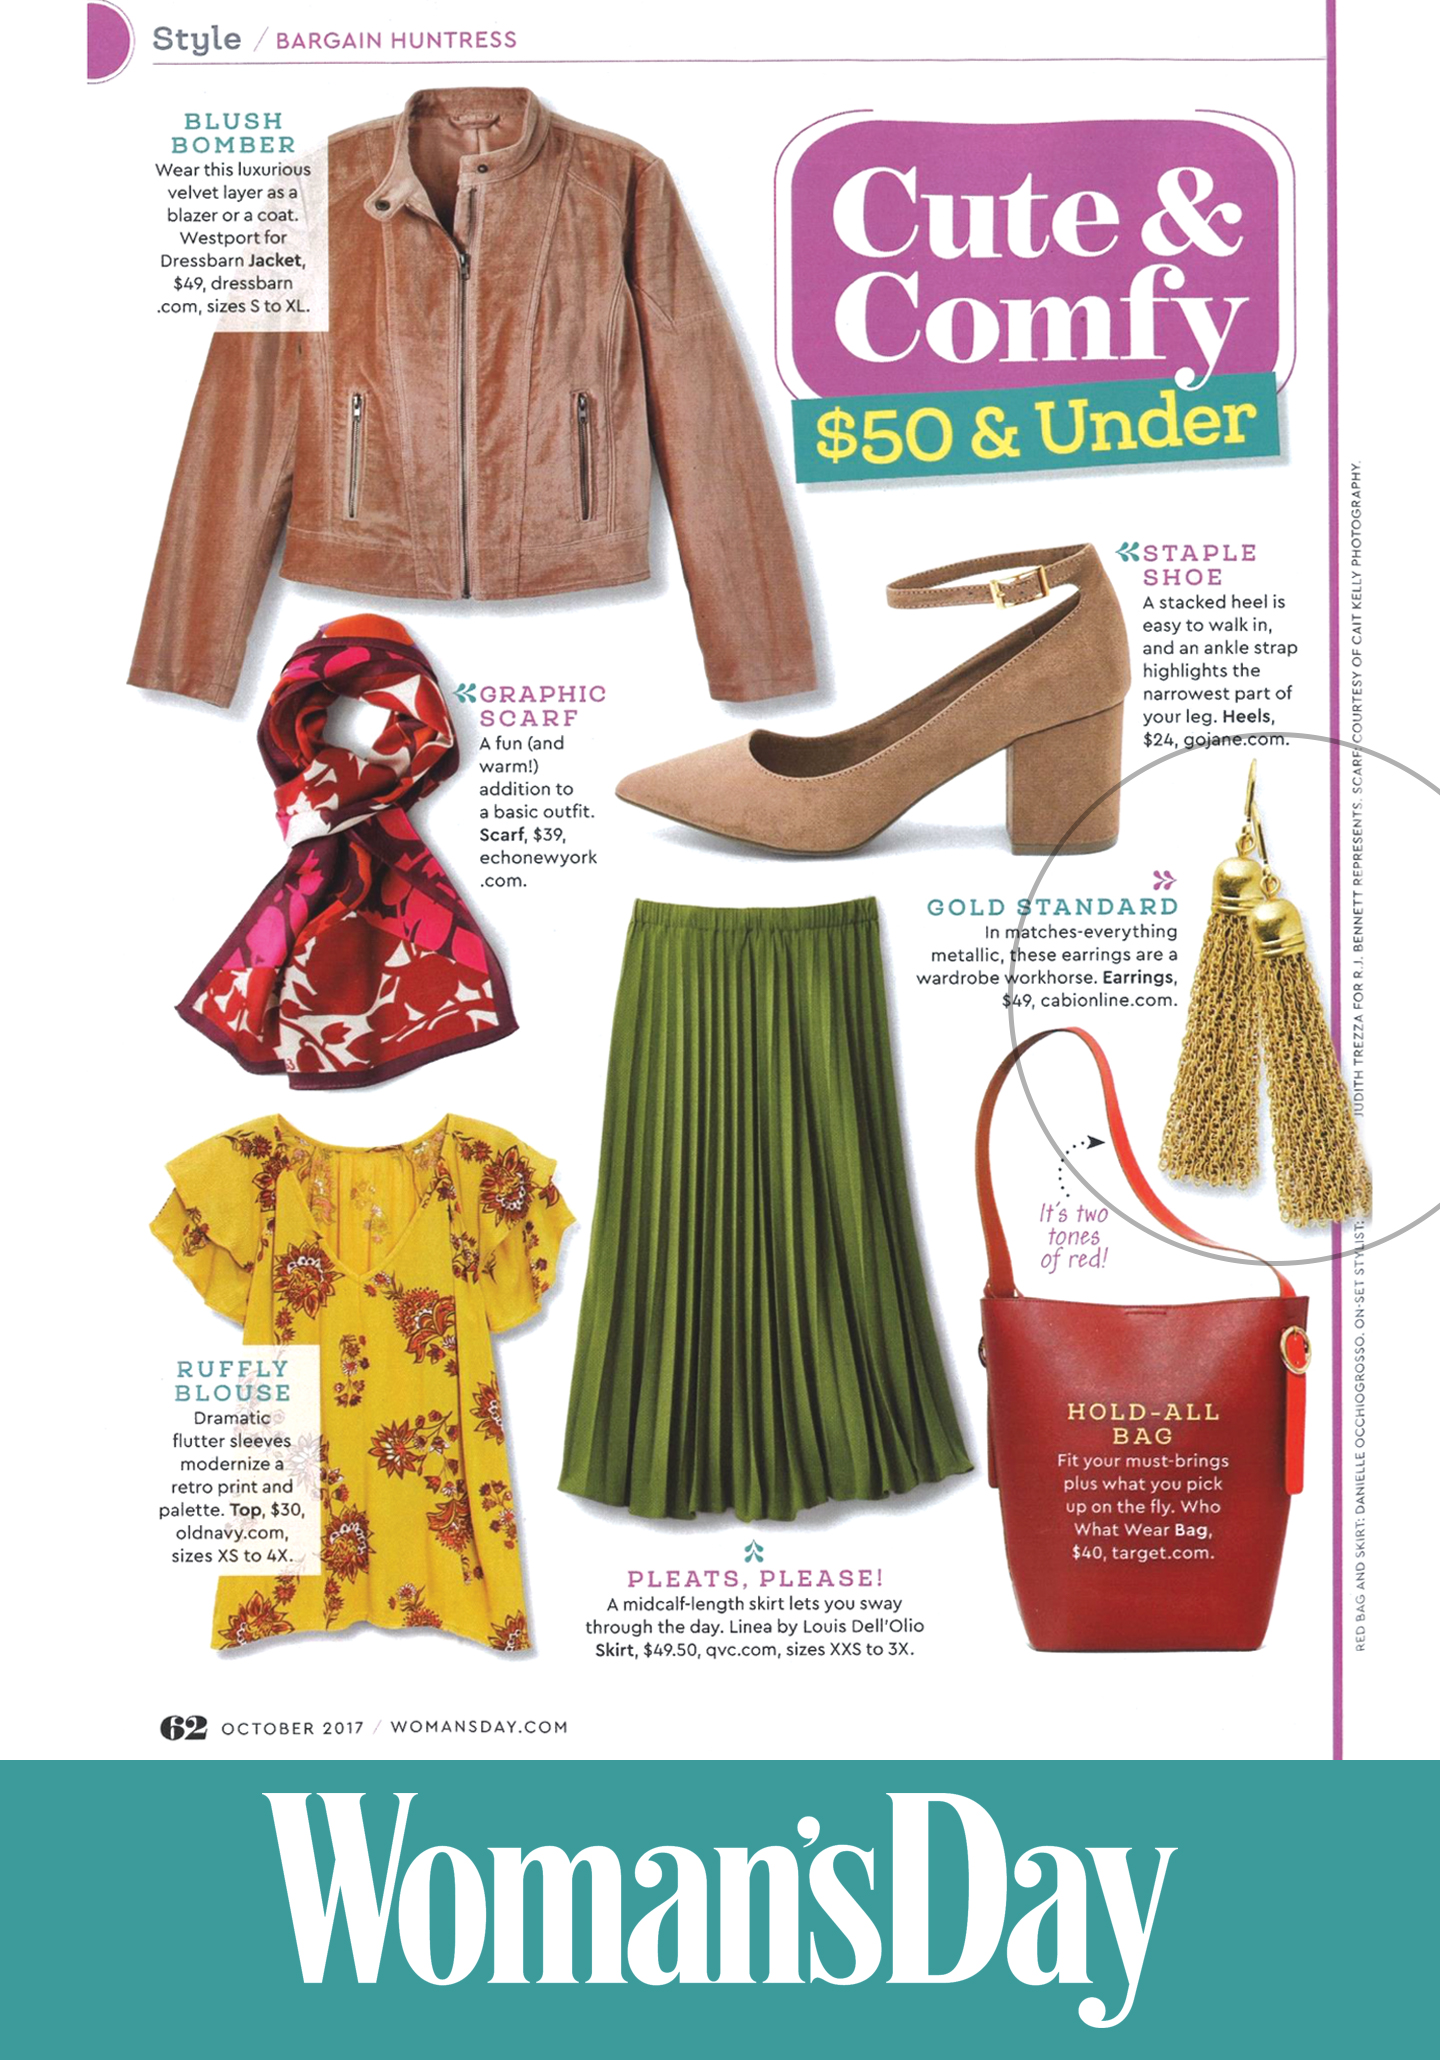 Spotted in Woman's Day: cabi's Fall 2017 Flapper Earrings